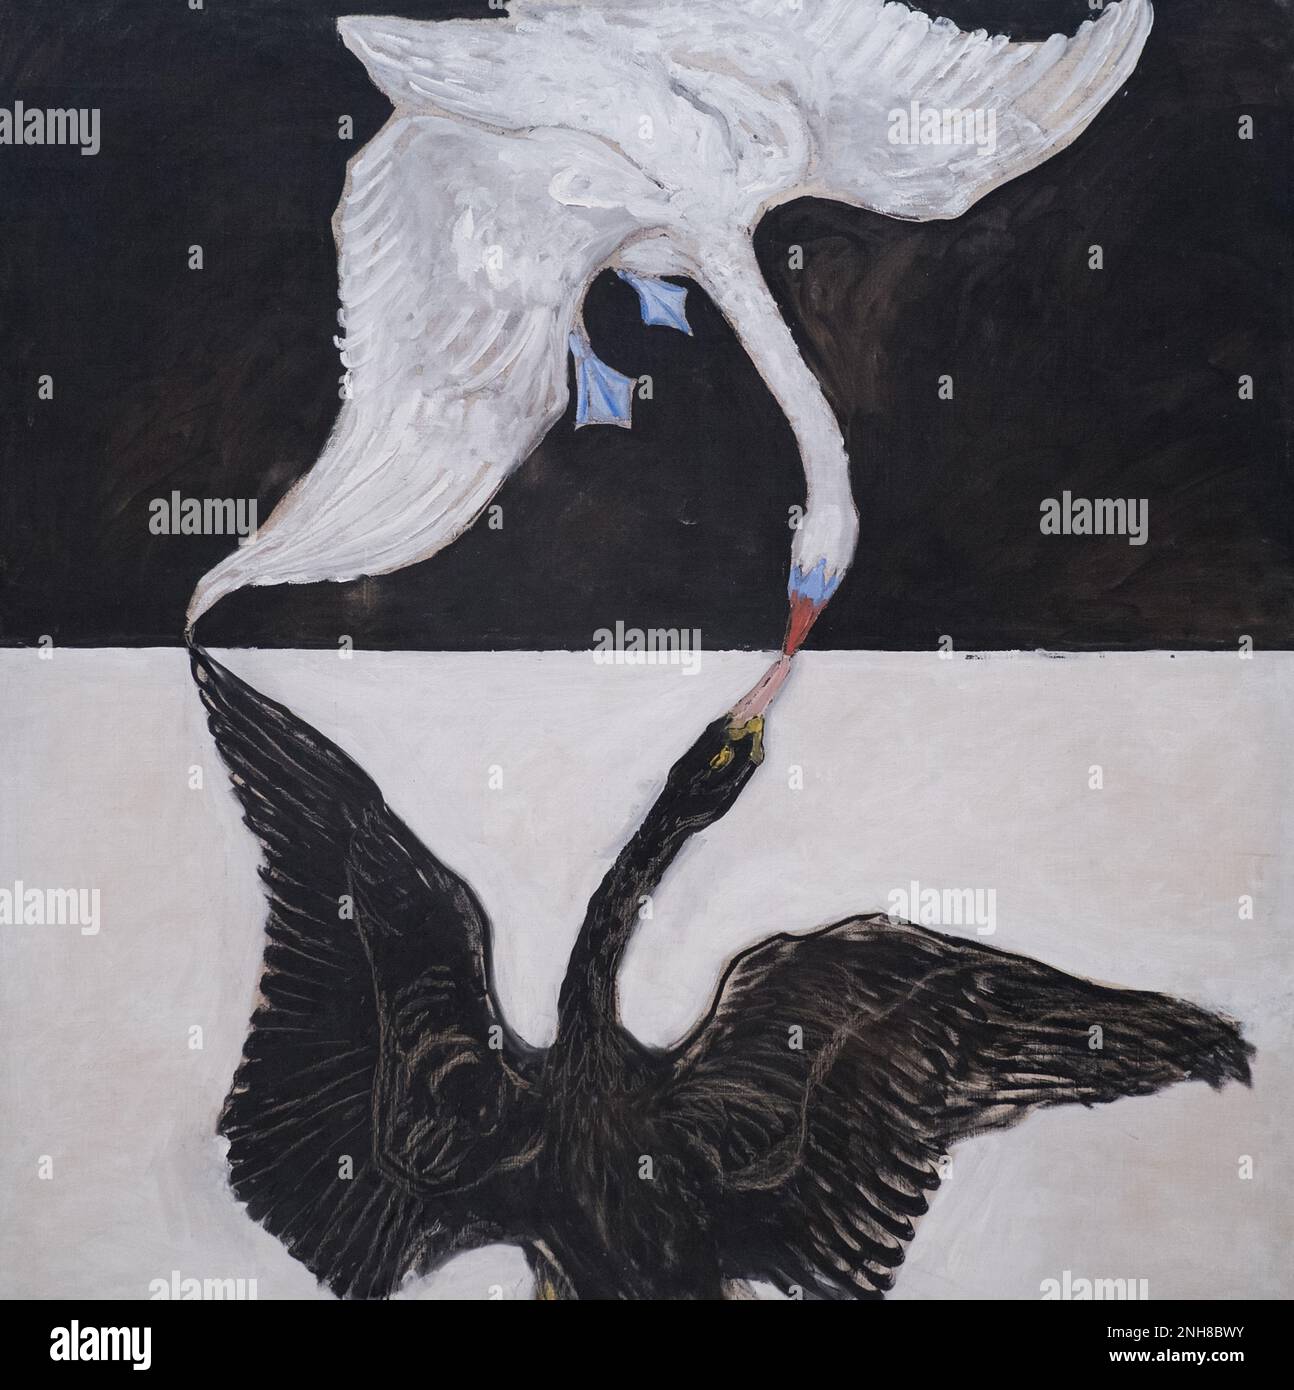 The majestic swan symbolised the ‘grandeur of the spirit’ to Helena Blavatsky, founder of Theosophy, a spiritualist movement of great interest to Hilma af Klint; in alchemy, the swan represents the union of opposites necessary for the creation of the philosopher’s stone, a substance believed to turn base metals into gold. Stock Photo